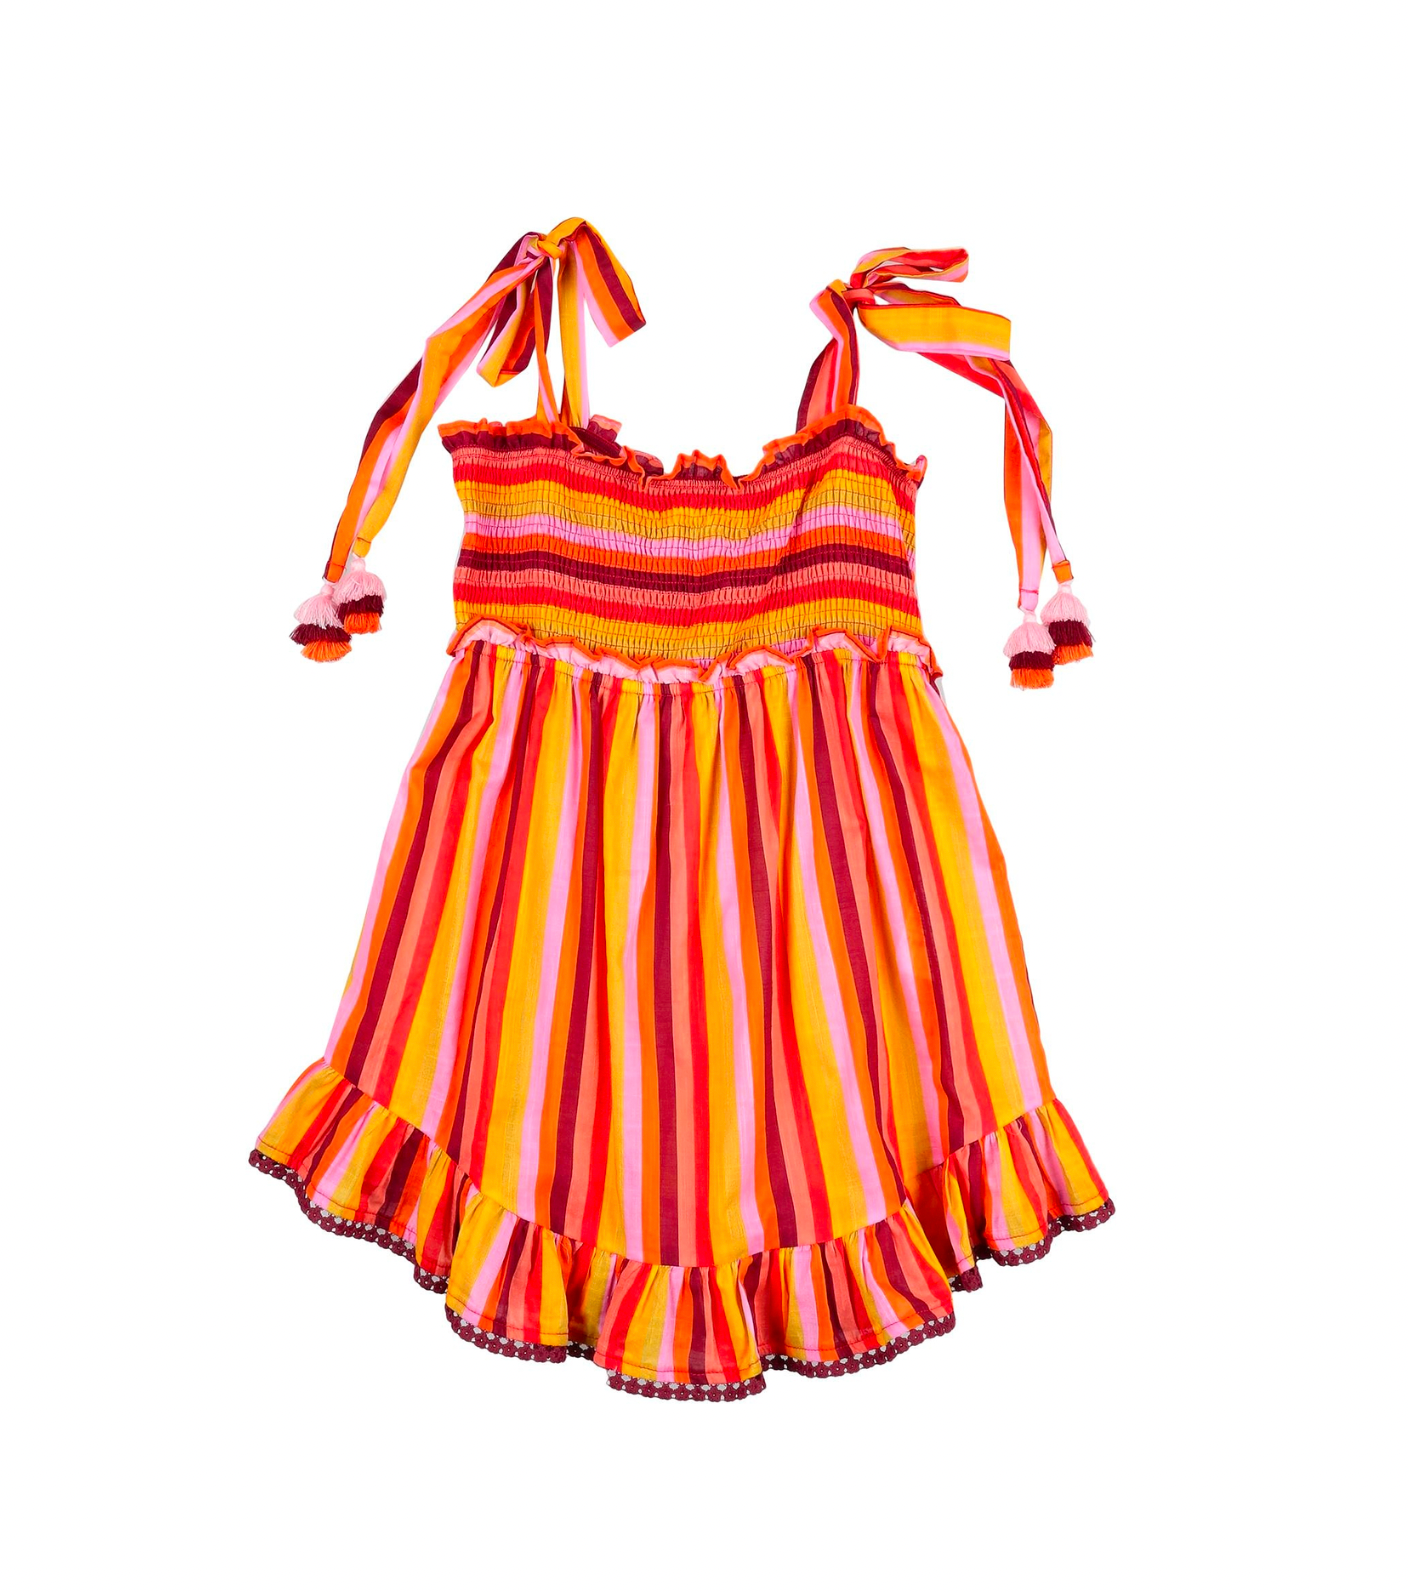 ZIMMERMANN - Multicolored dress - 10 years old